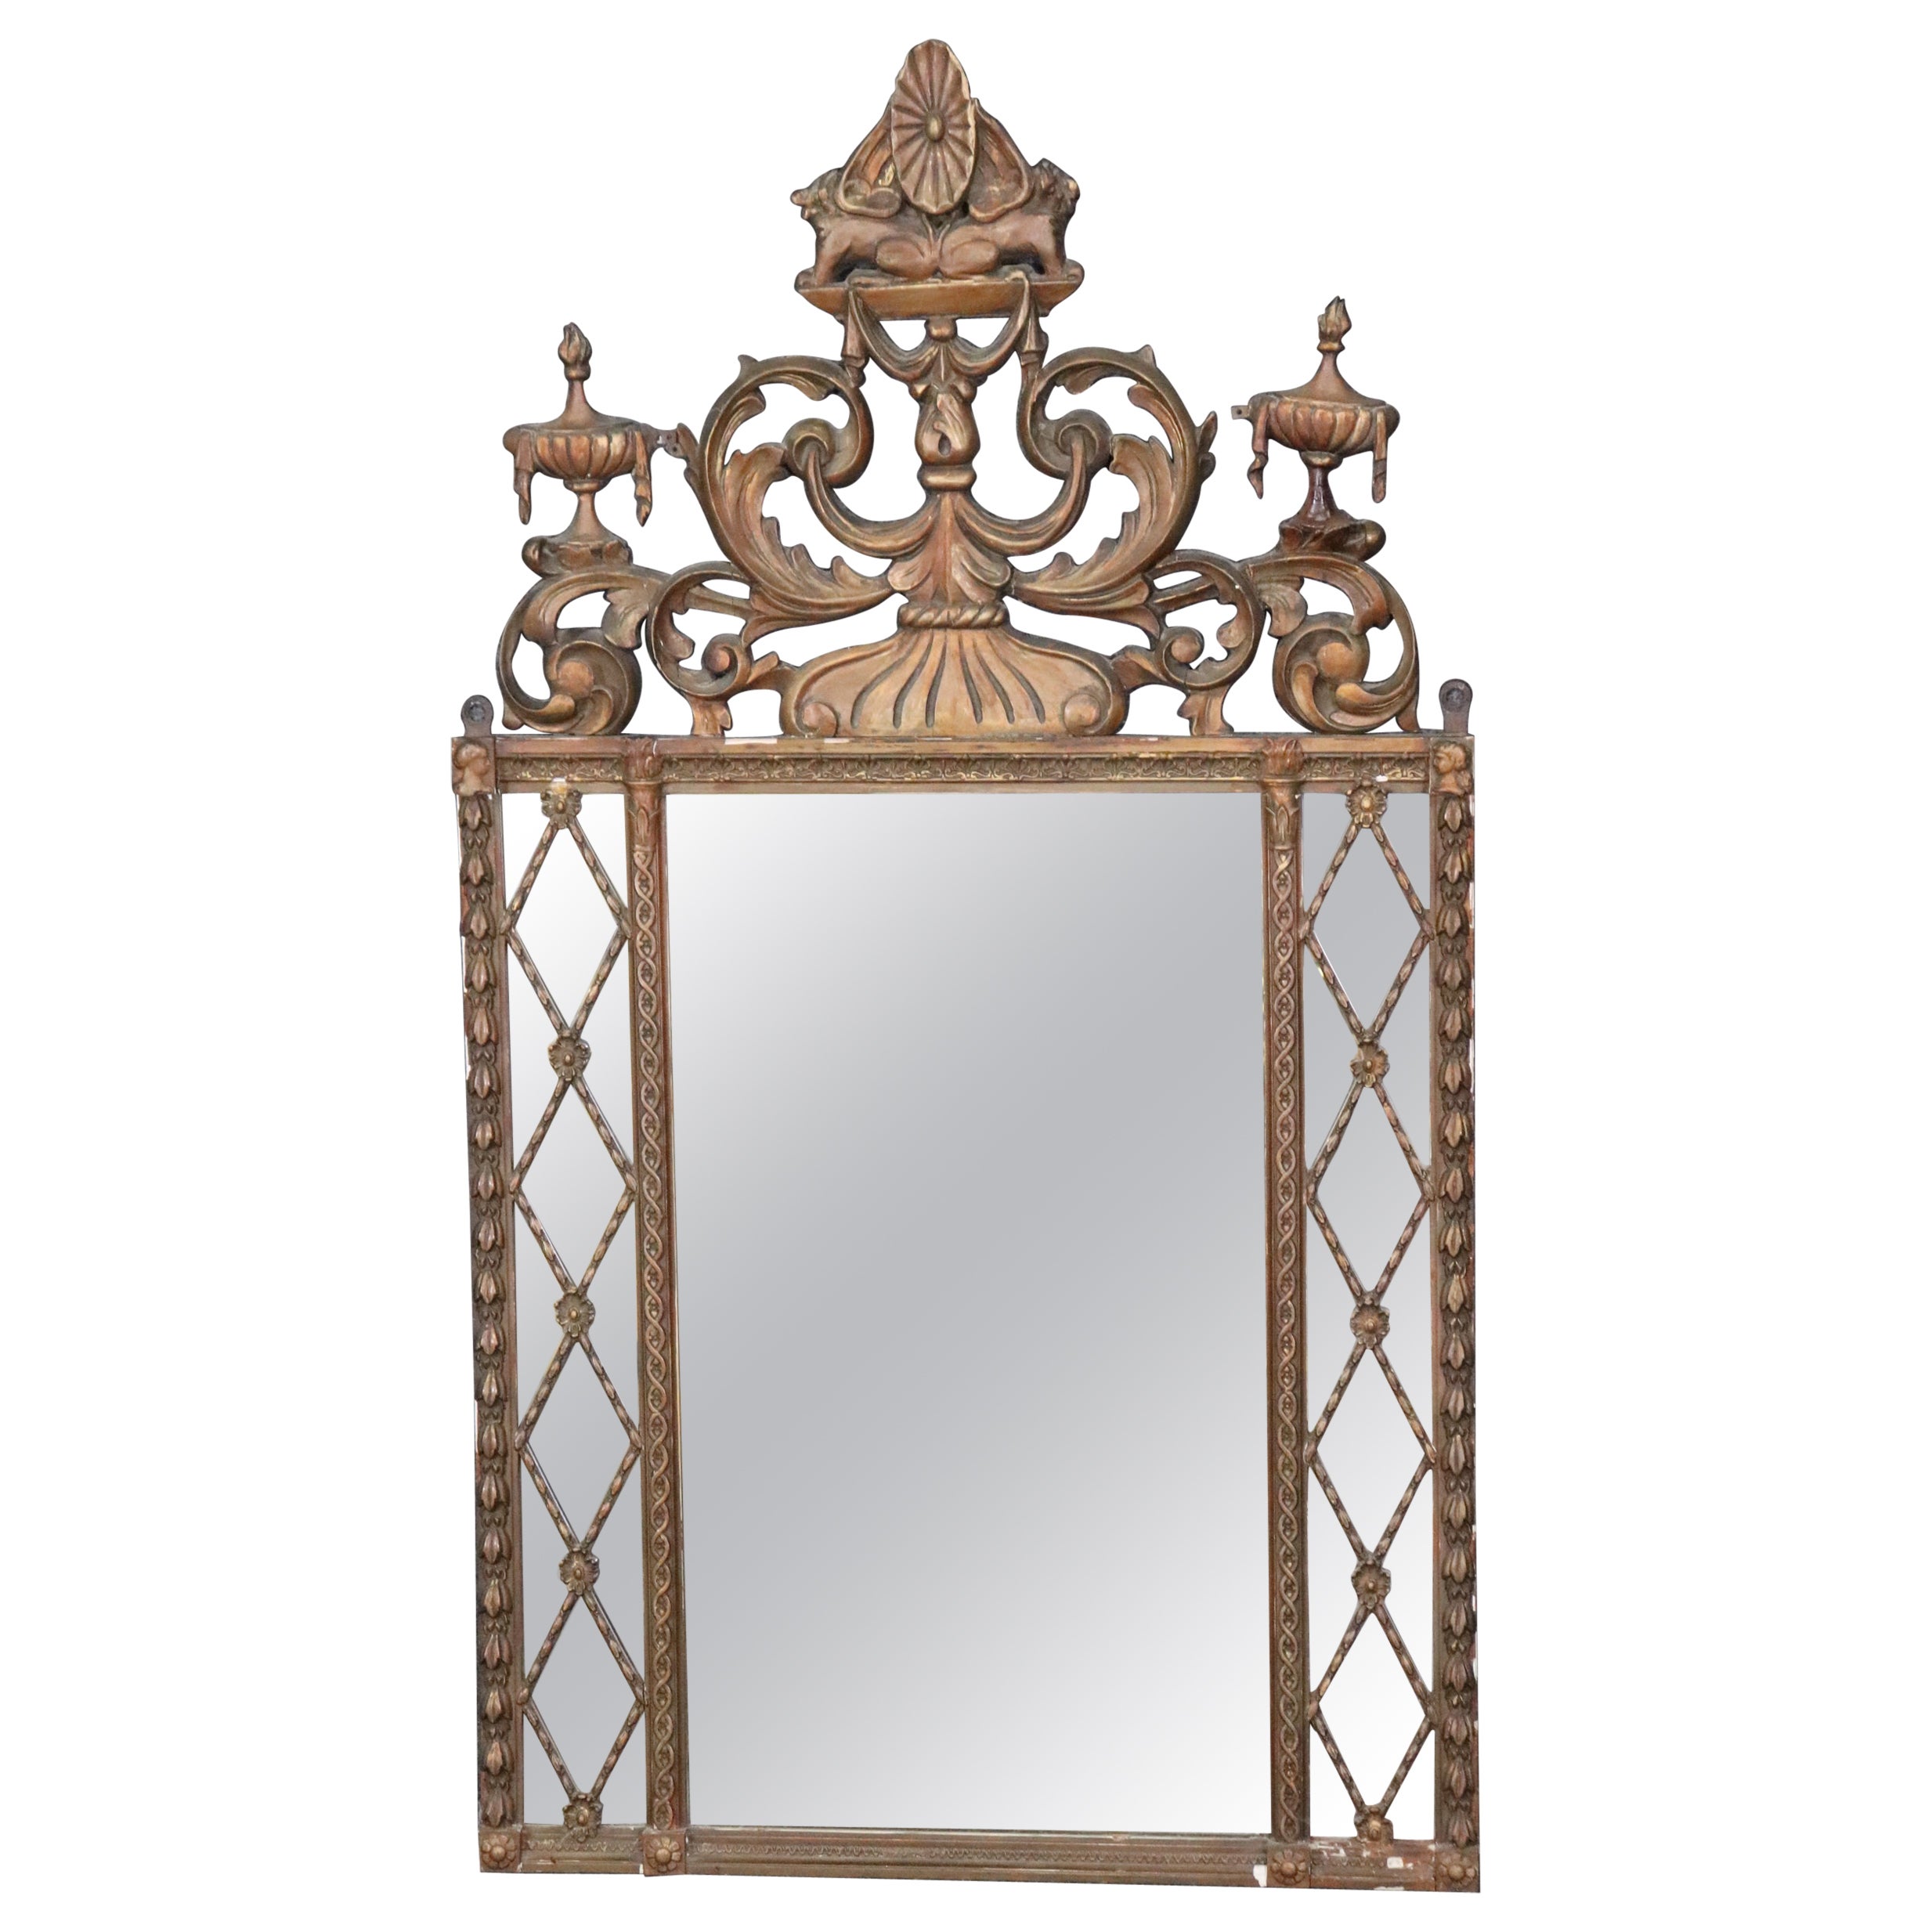 French Regency Style Carved Wood and Gesso Wall Hanging Mirror For Sale